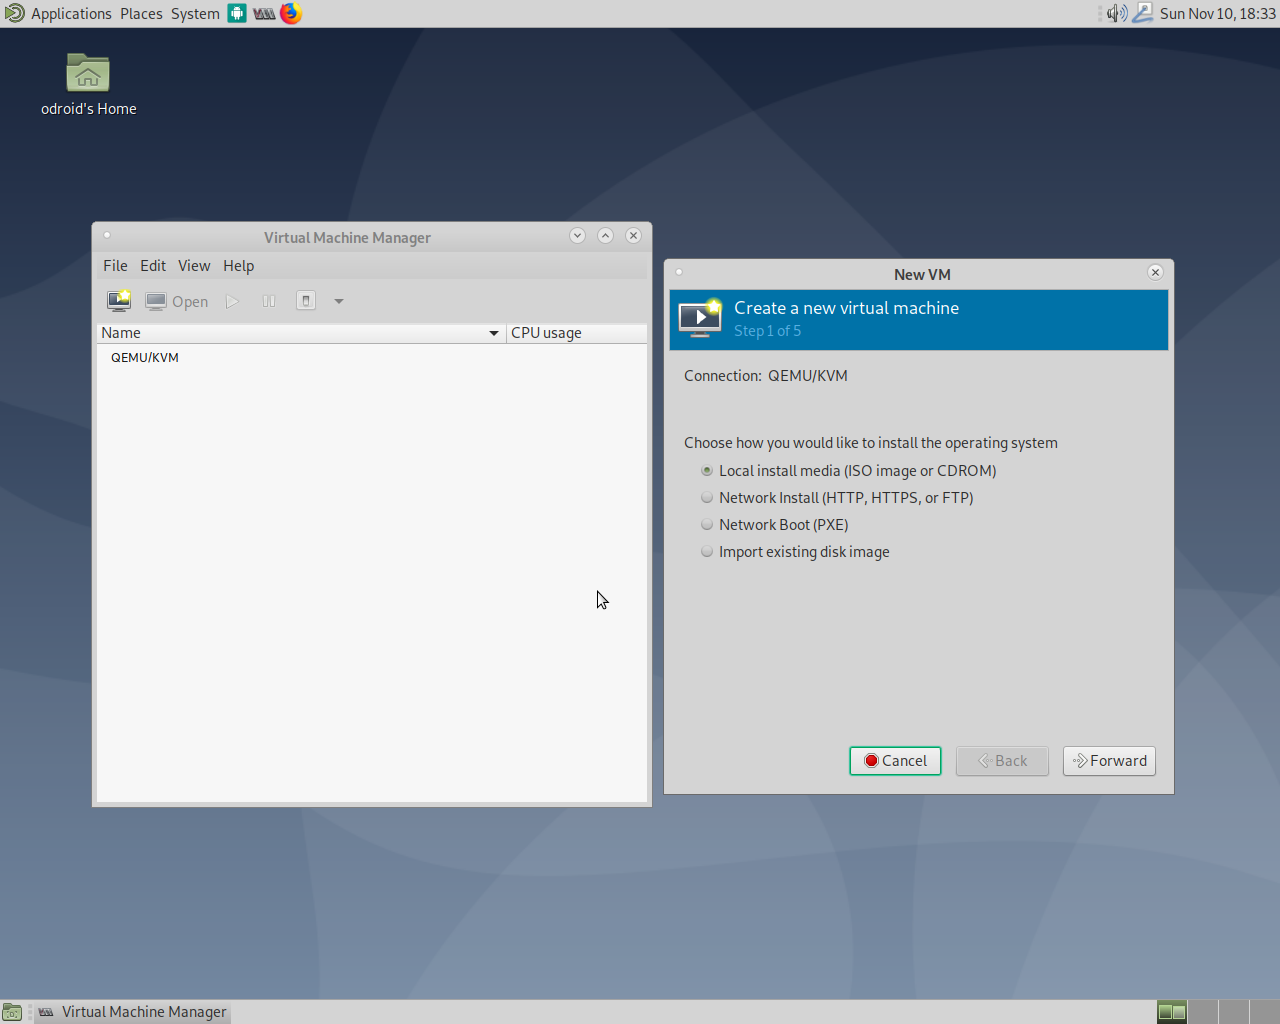 Figure 2 - Setting up a new VM with virt-manager is very easy